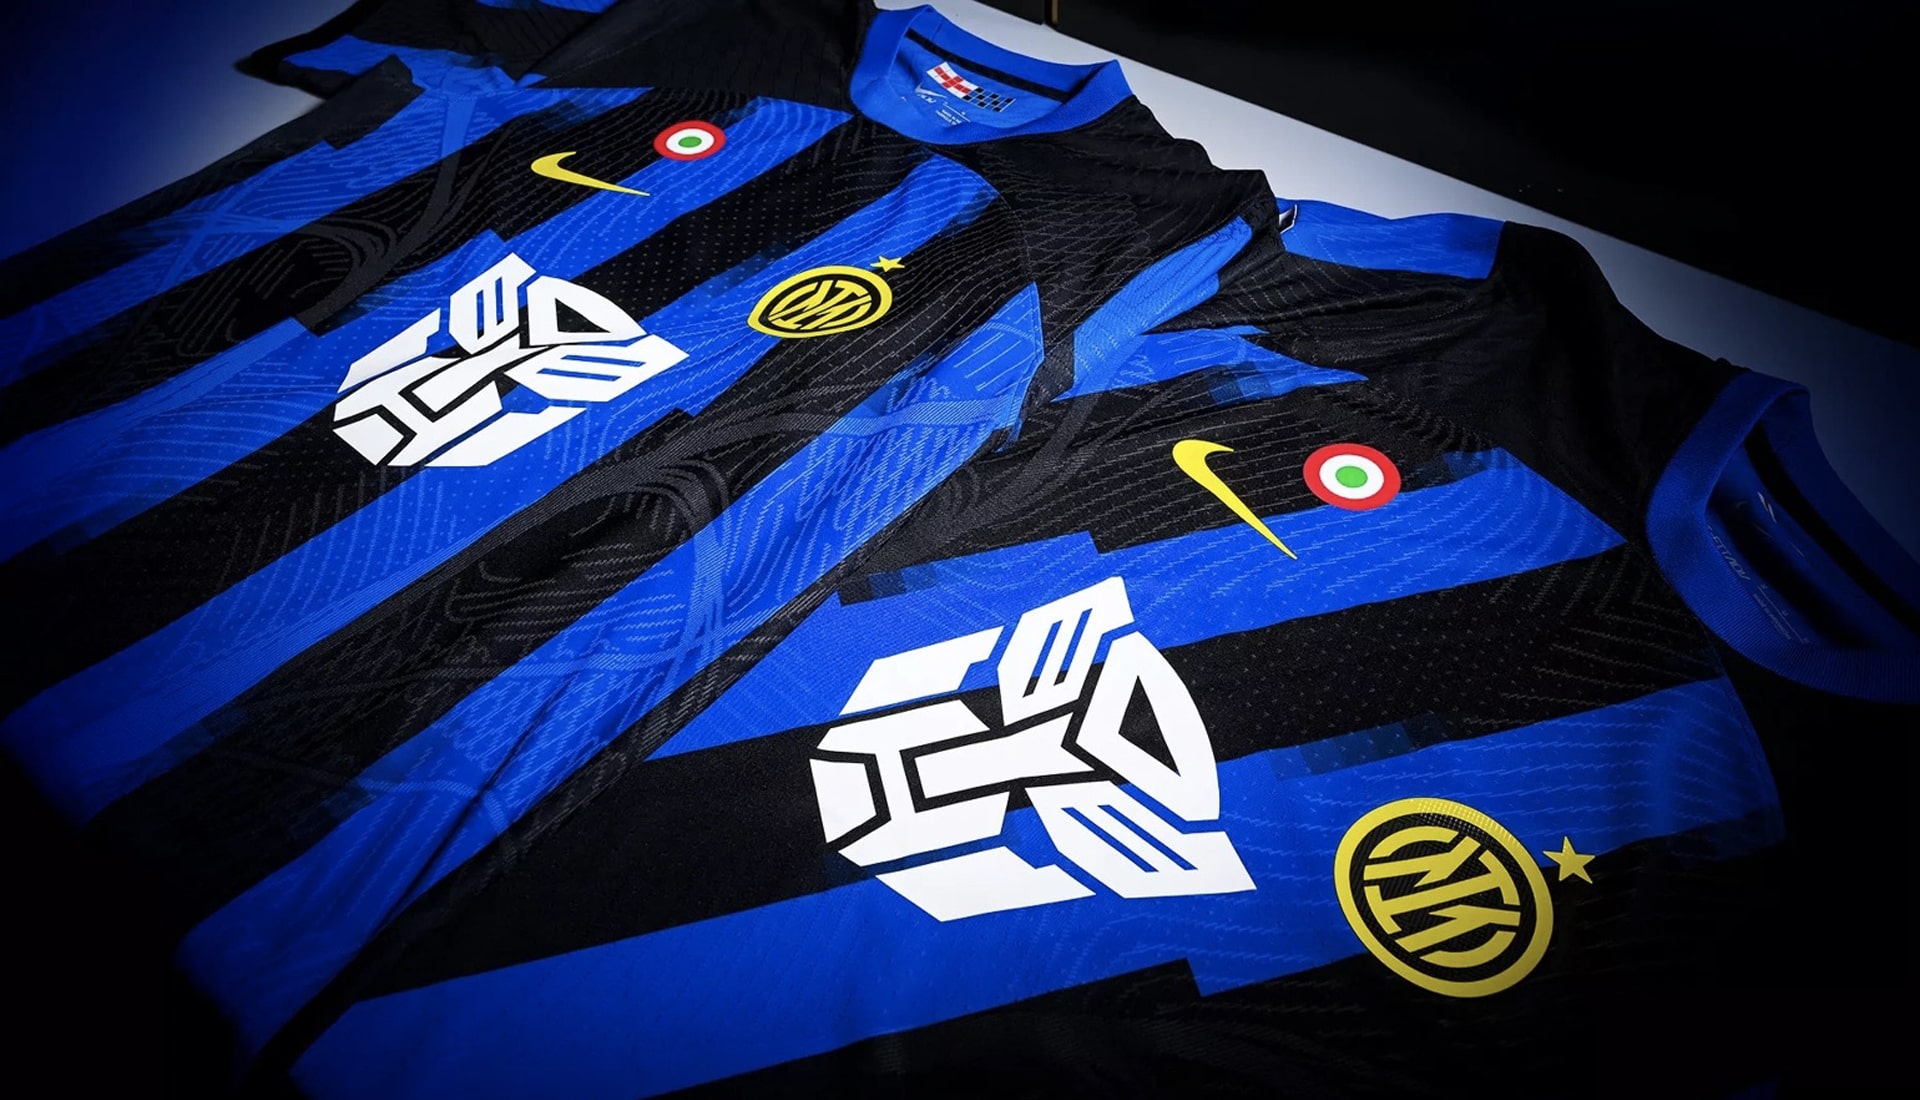 Inter's Home Shirt To Feature Transformers Logo In Upcoming Match ...